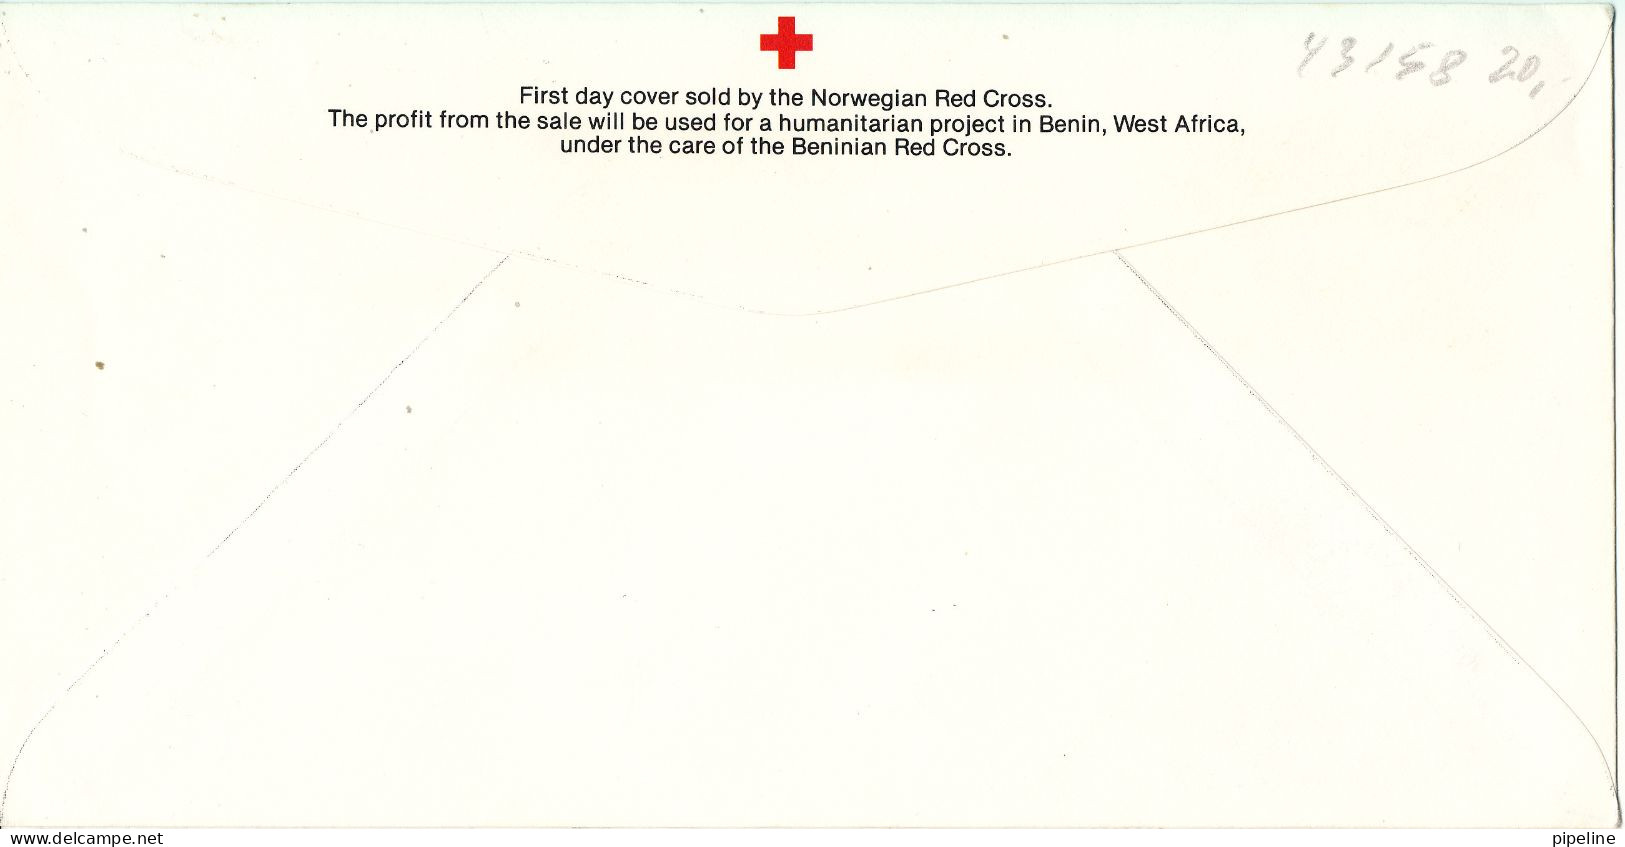 Benin FDC 28-4-1983 Covers Sold By Norwegian RED CROSS And Profit Will Be Used For Humanitarian Project In Benin - Bénin – Dahomey (1960-...)